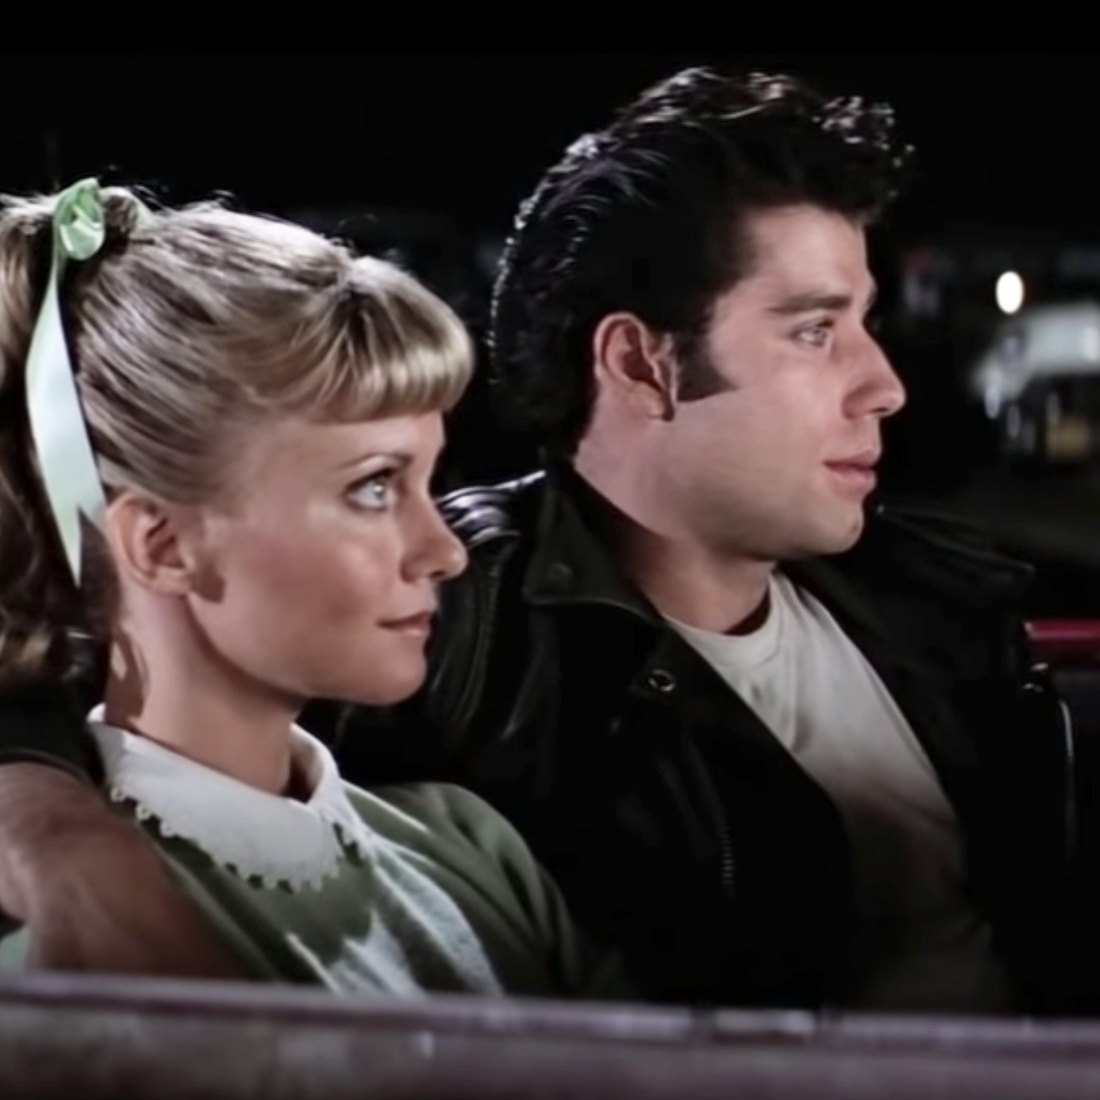 Let "Grease" inspire you to have a date outdoors.